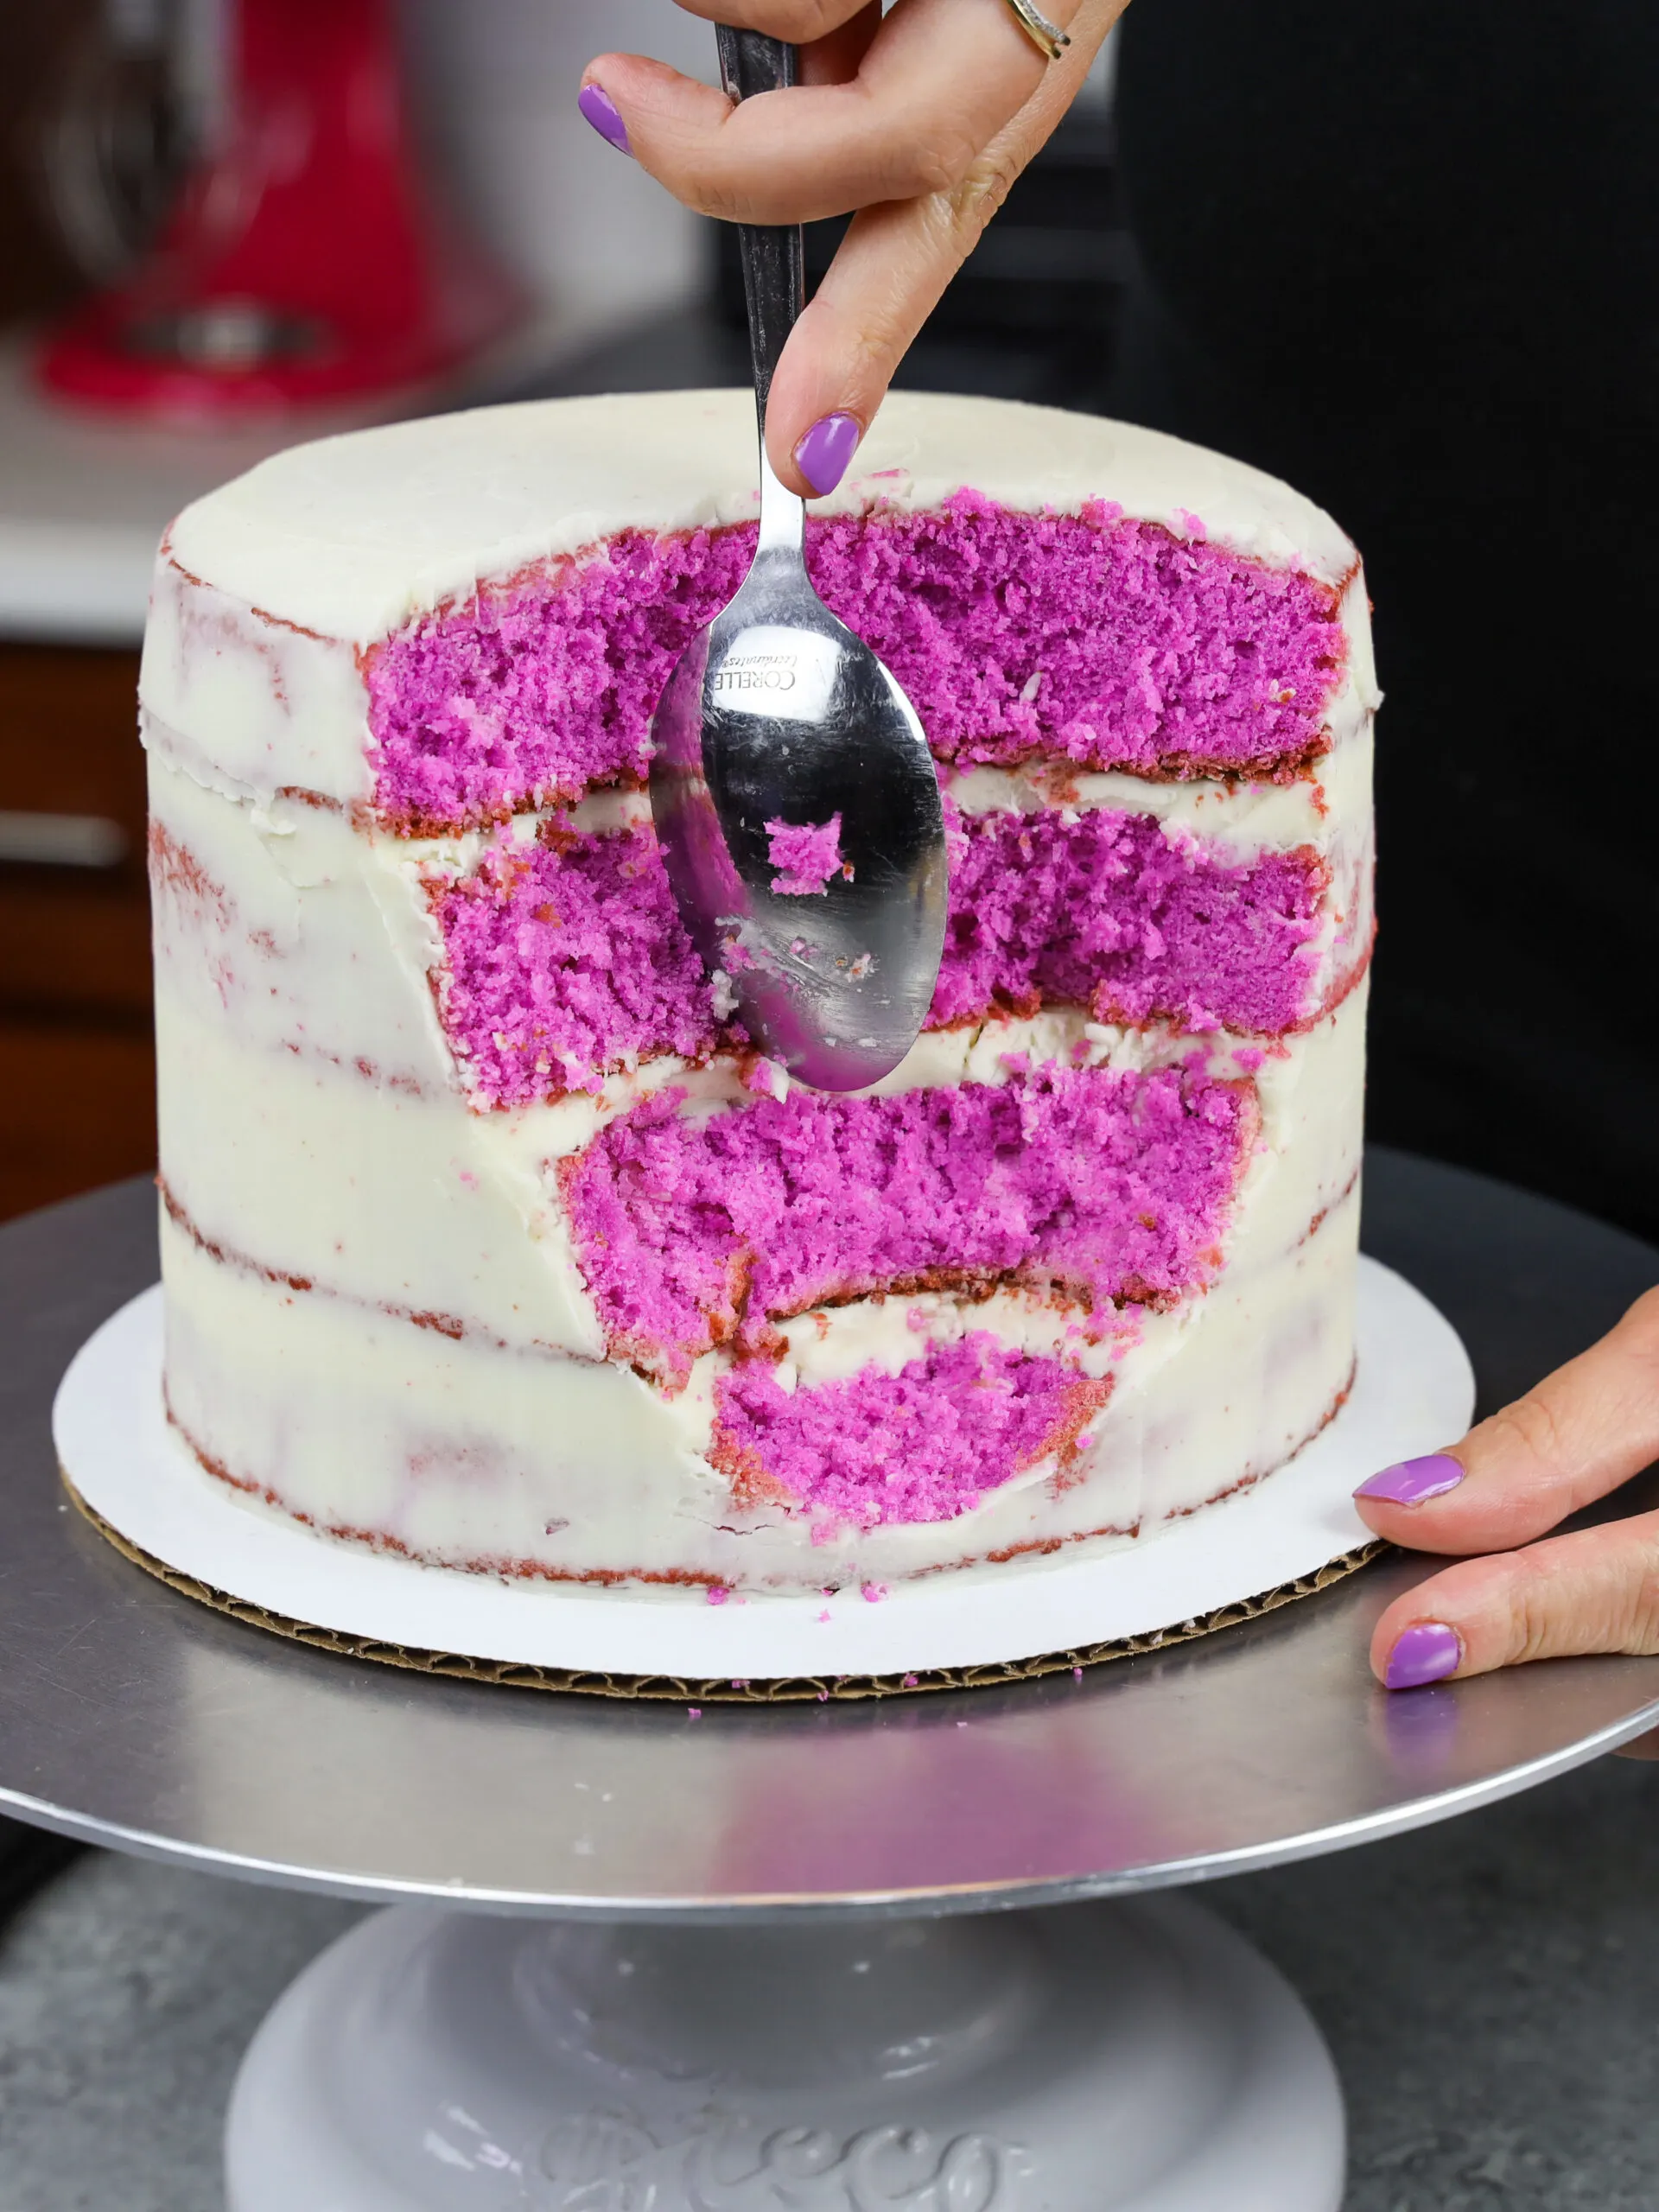 image of a cake being cut into to make a geode cake